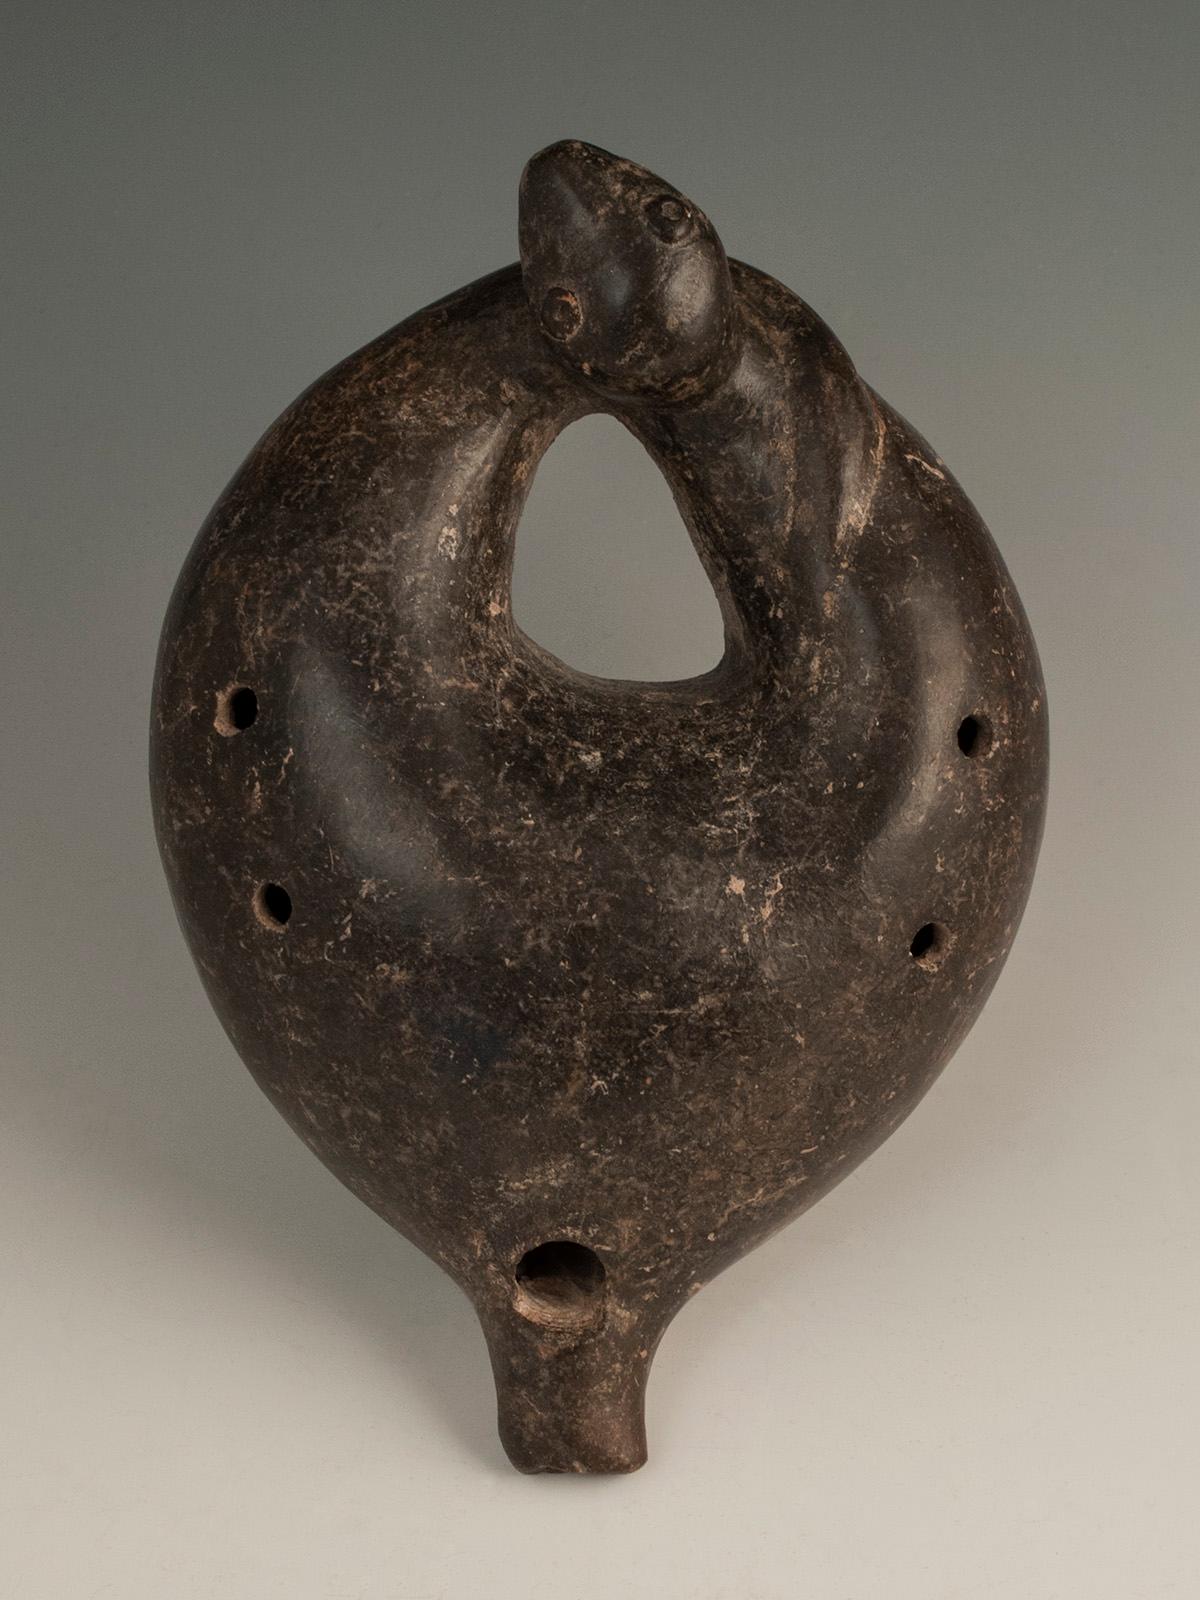 Circa 100 B.C.-250 A.D. Ocarina in the shape of a serpent, Colima, West Mexico

A wonderful ocarina in a curled serpent form with head over tail, blow hole at the back and four holes for different notes on the body. It produces rich, resonant sound